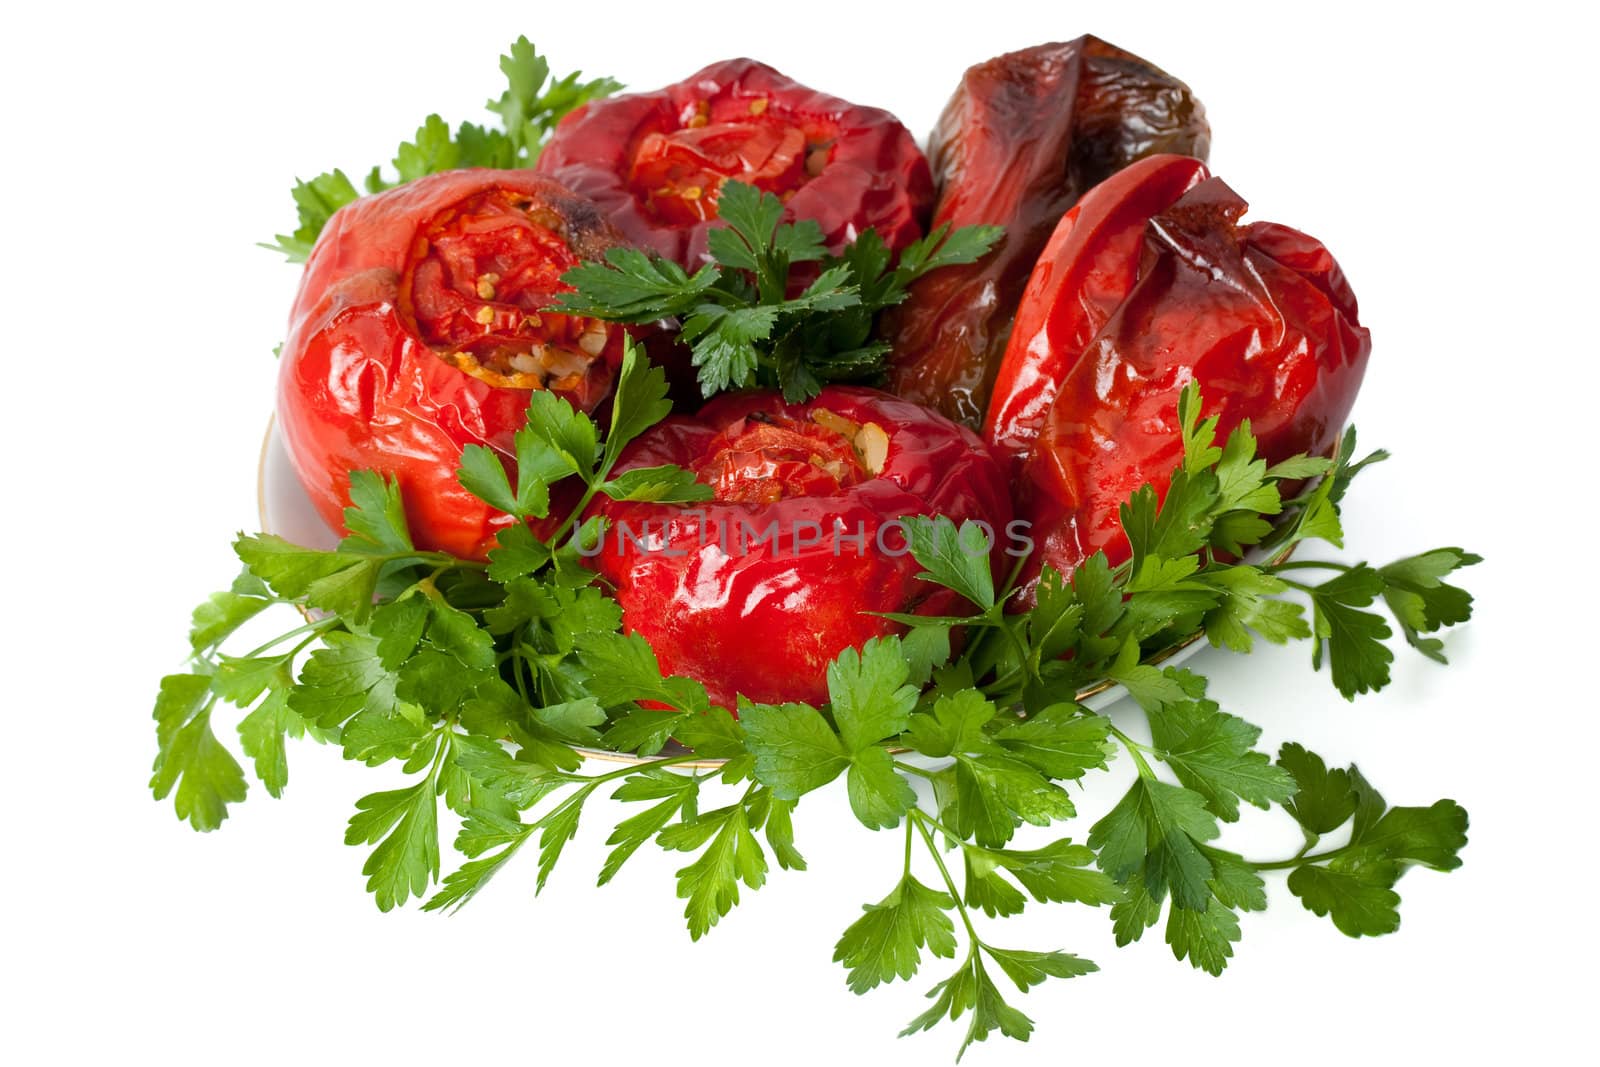 Five red stuffed peppers with rice and fresh parsley